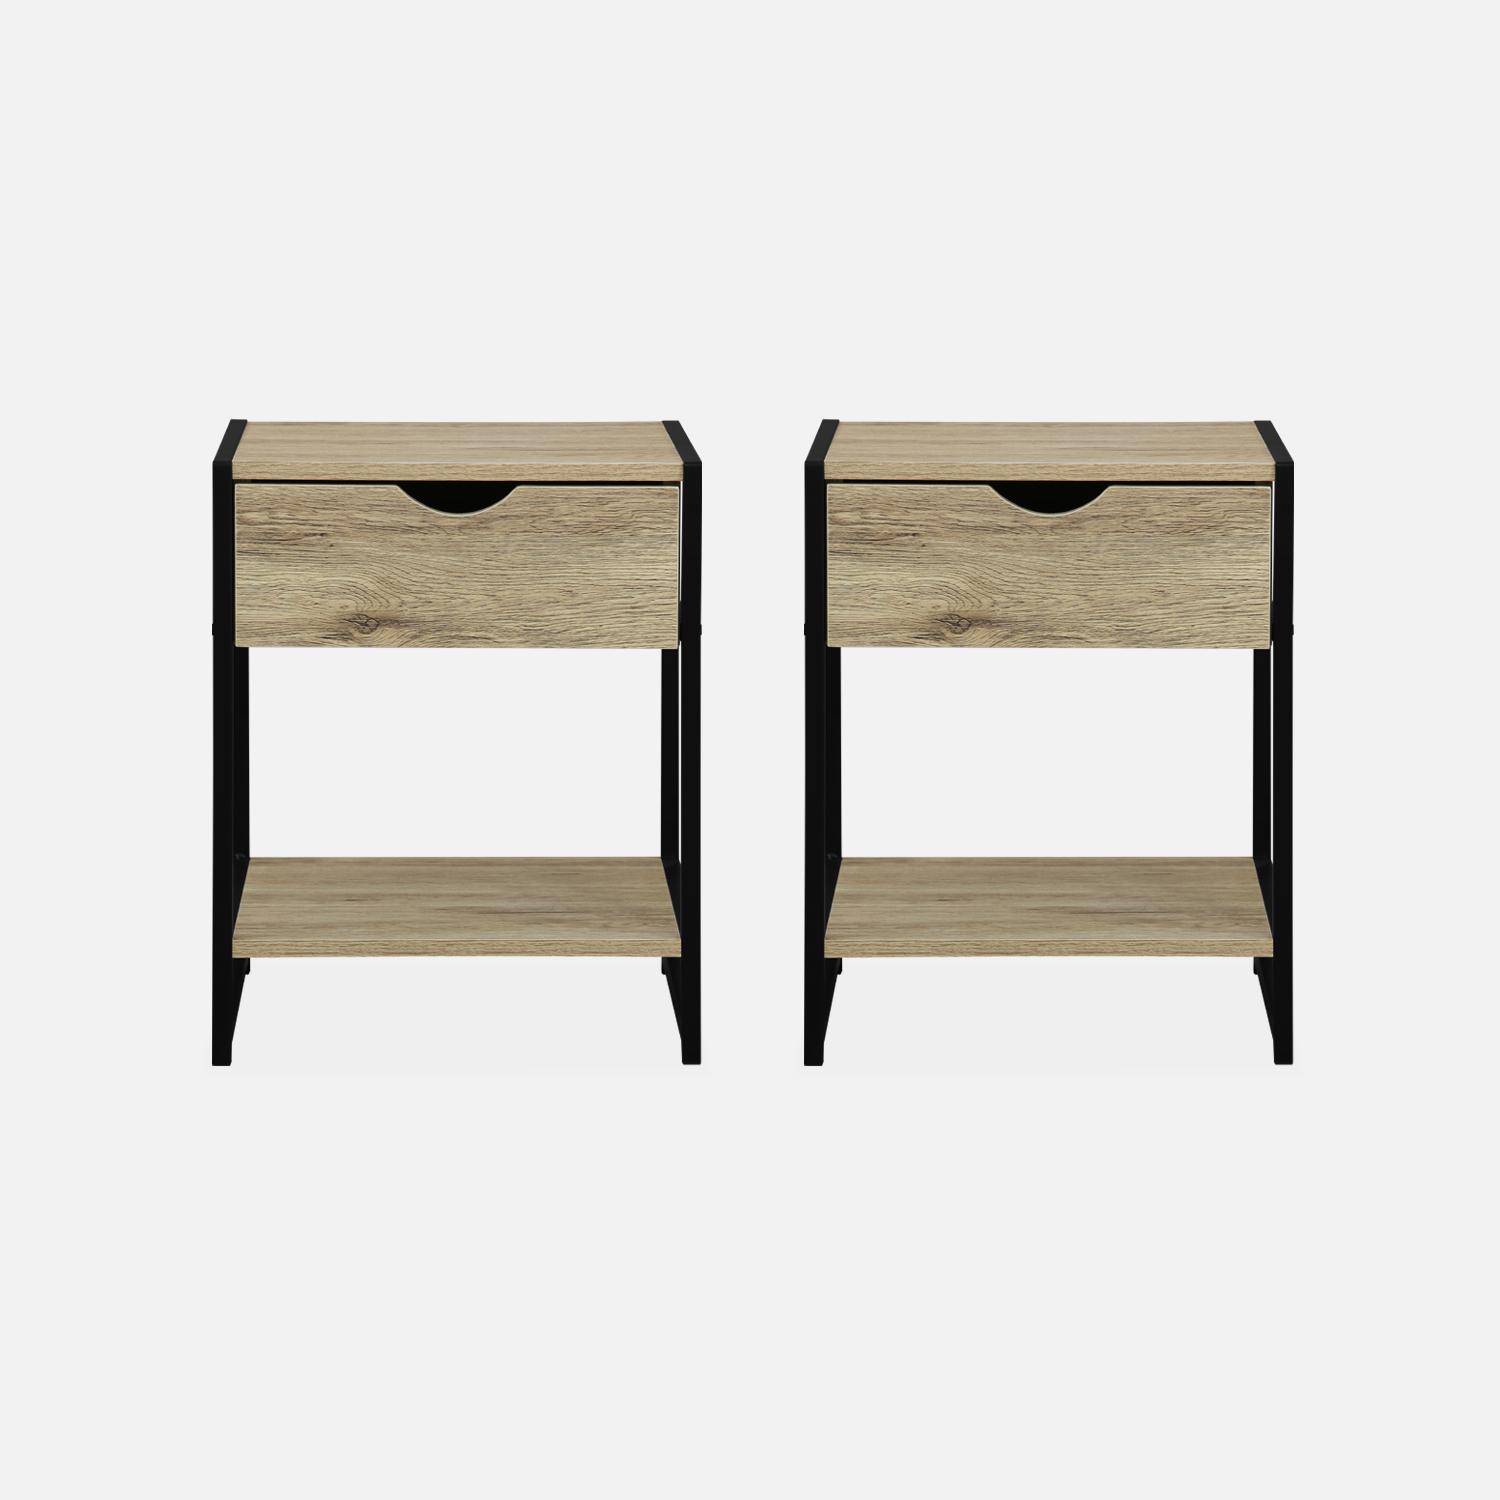 Pair of metal and wood-effect bedside tables with drawer and shelf, 40x40x50cm - Loft,sweeek,Photo5